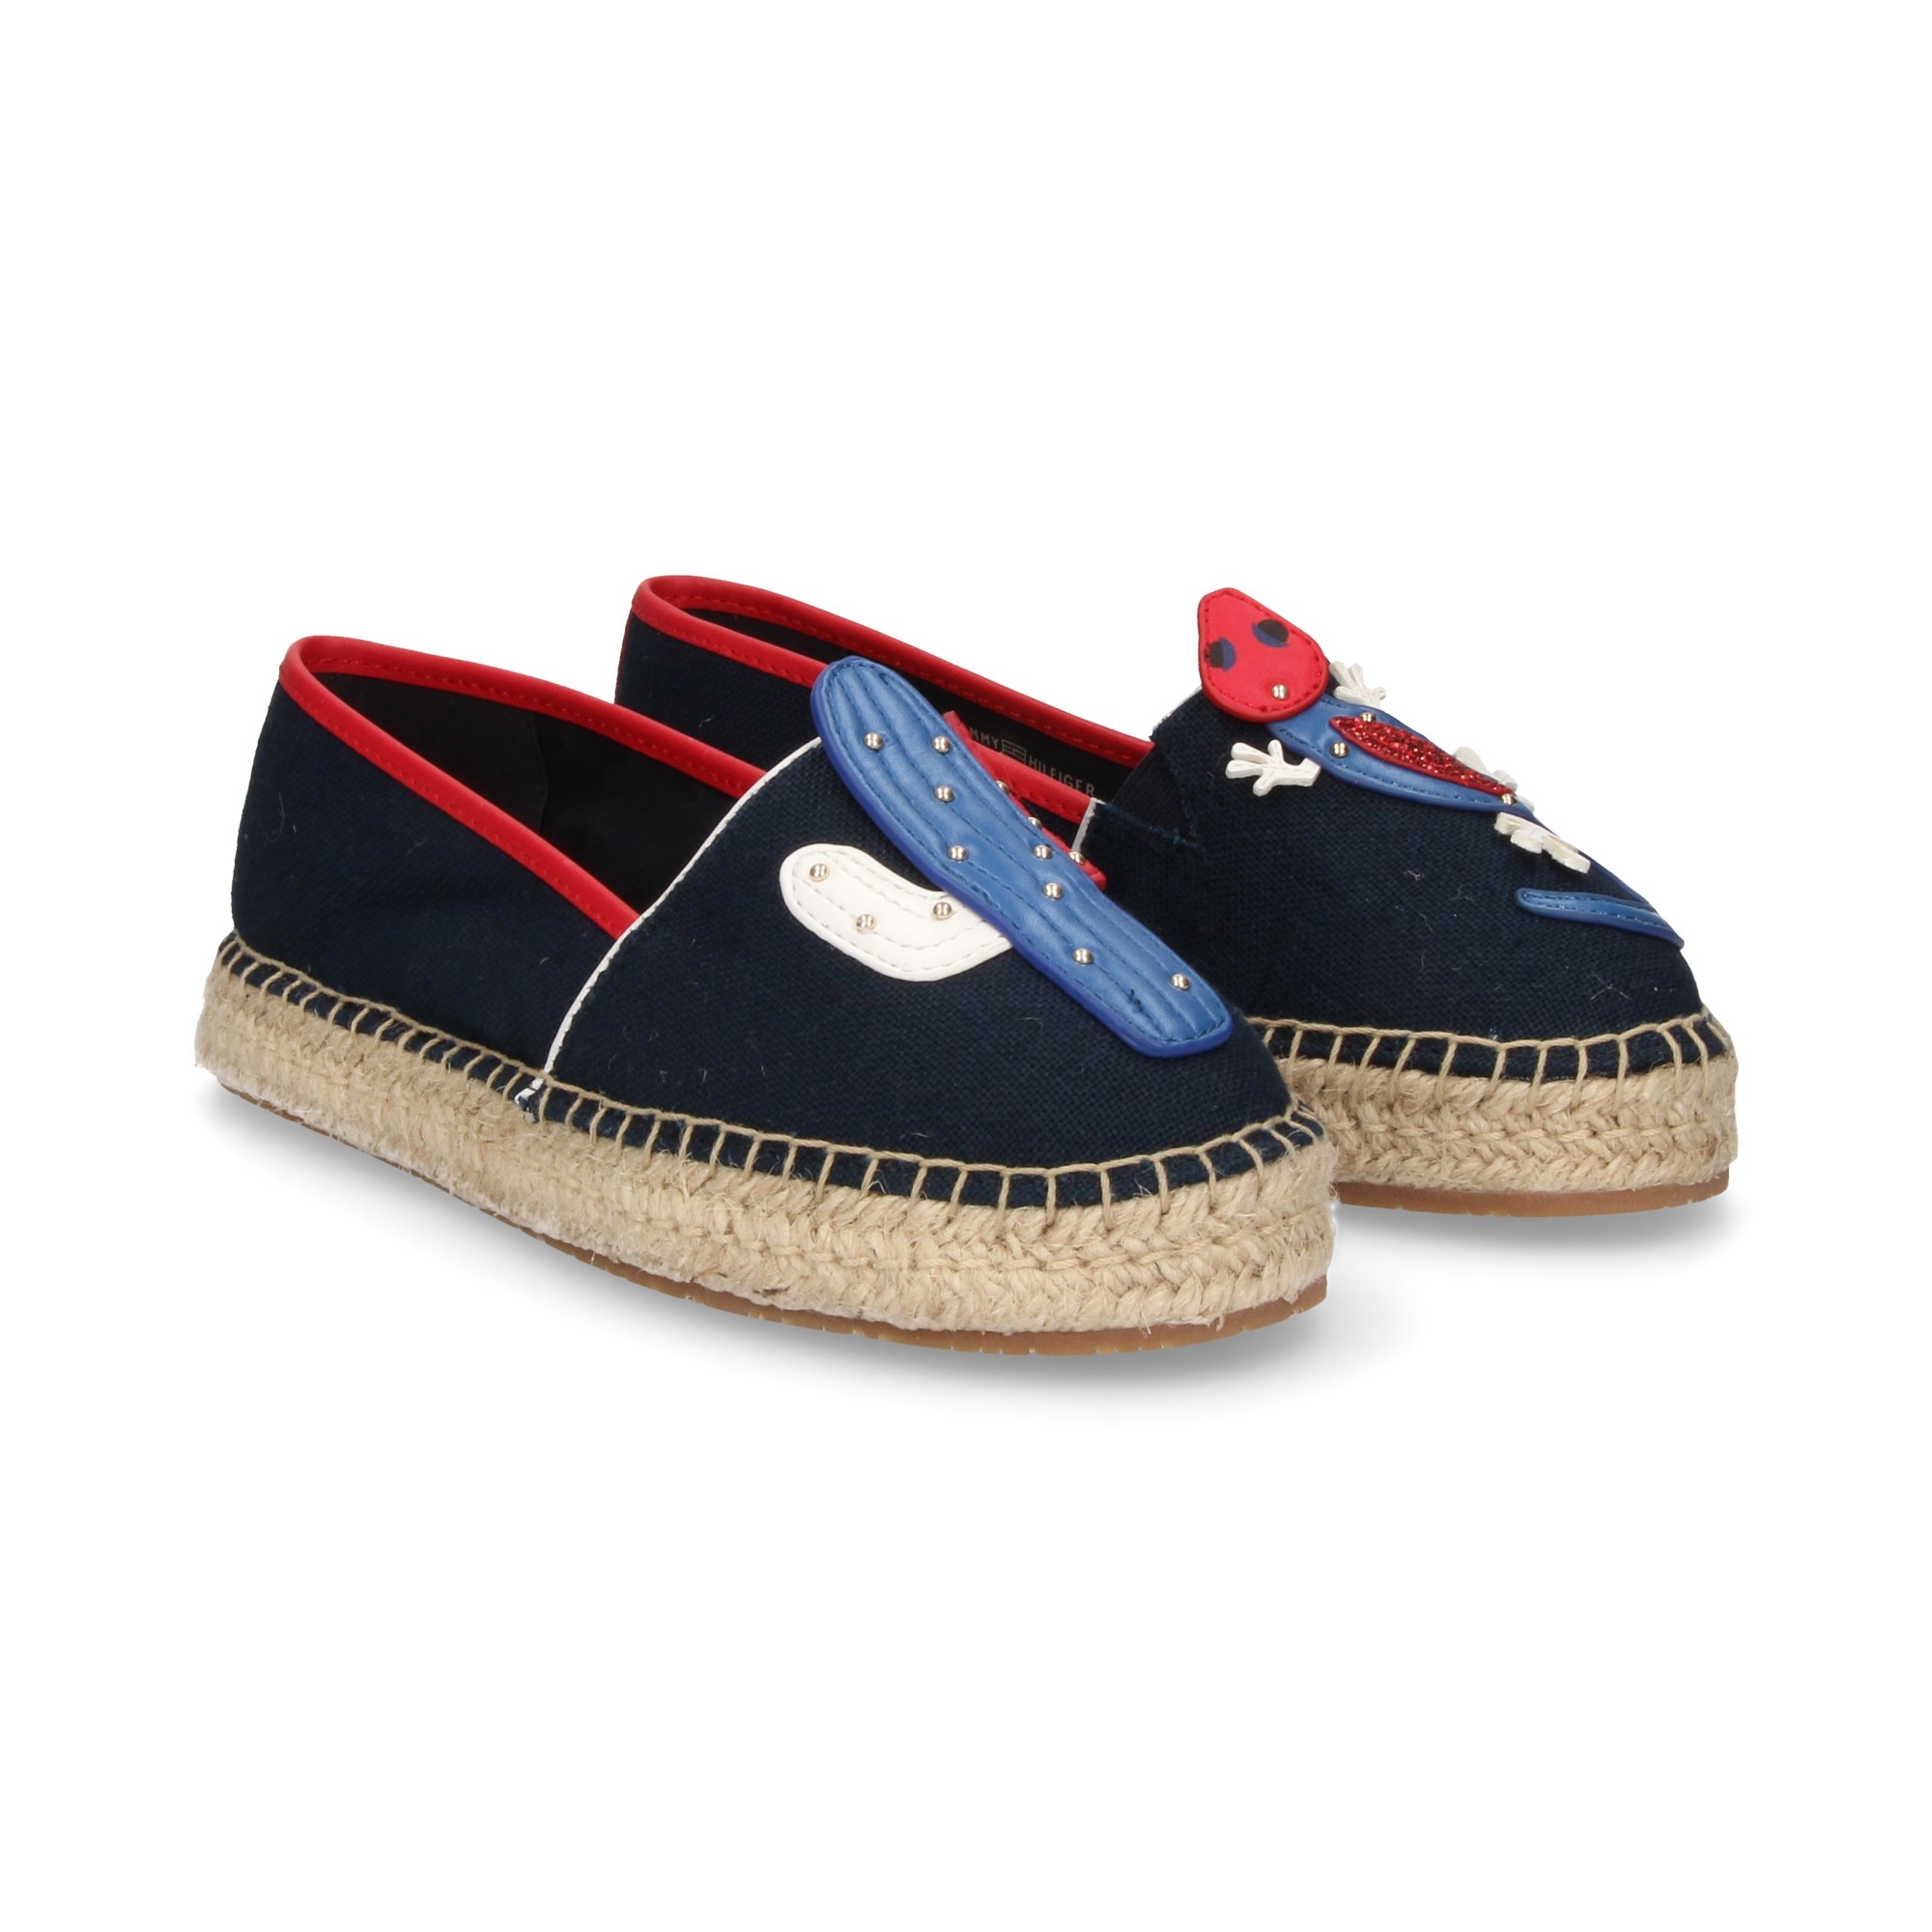 fusionere perforere amme TOMMY HILFIGER Women's Espadrilles FW03389 403 MIDNIGHT